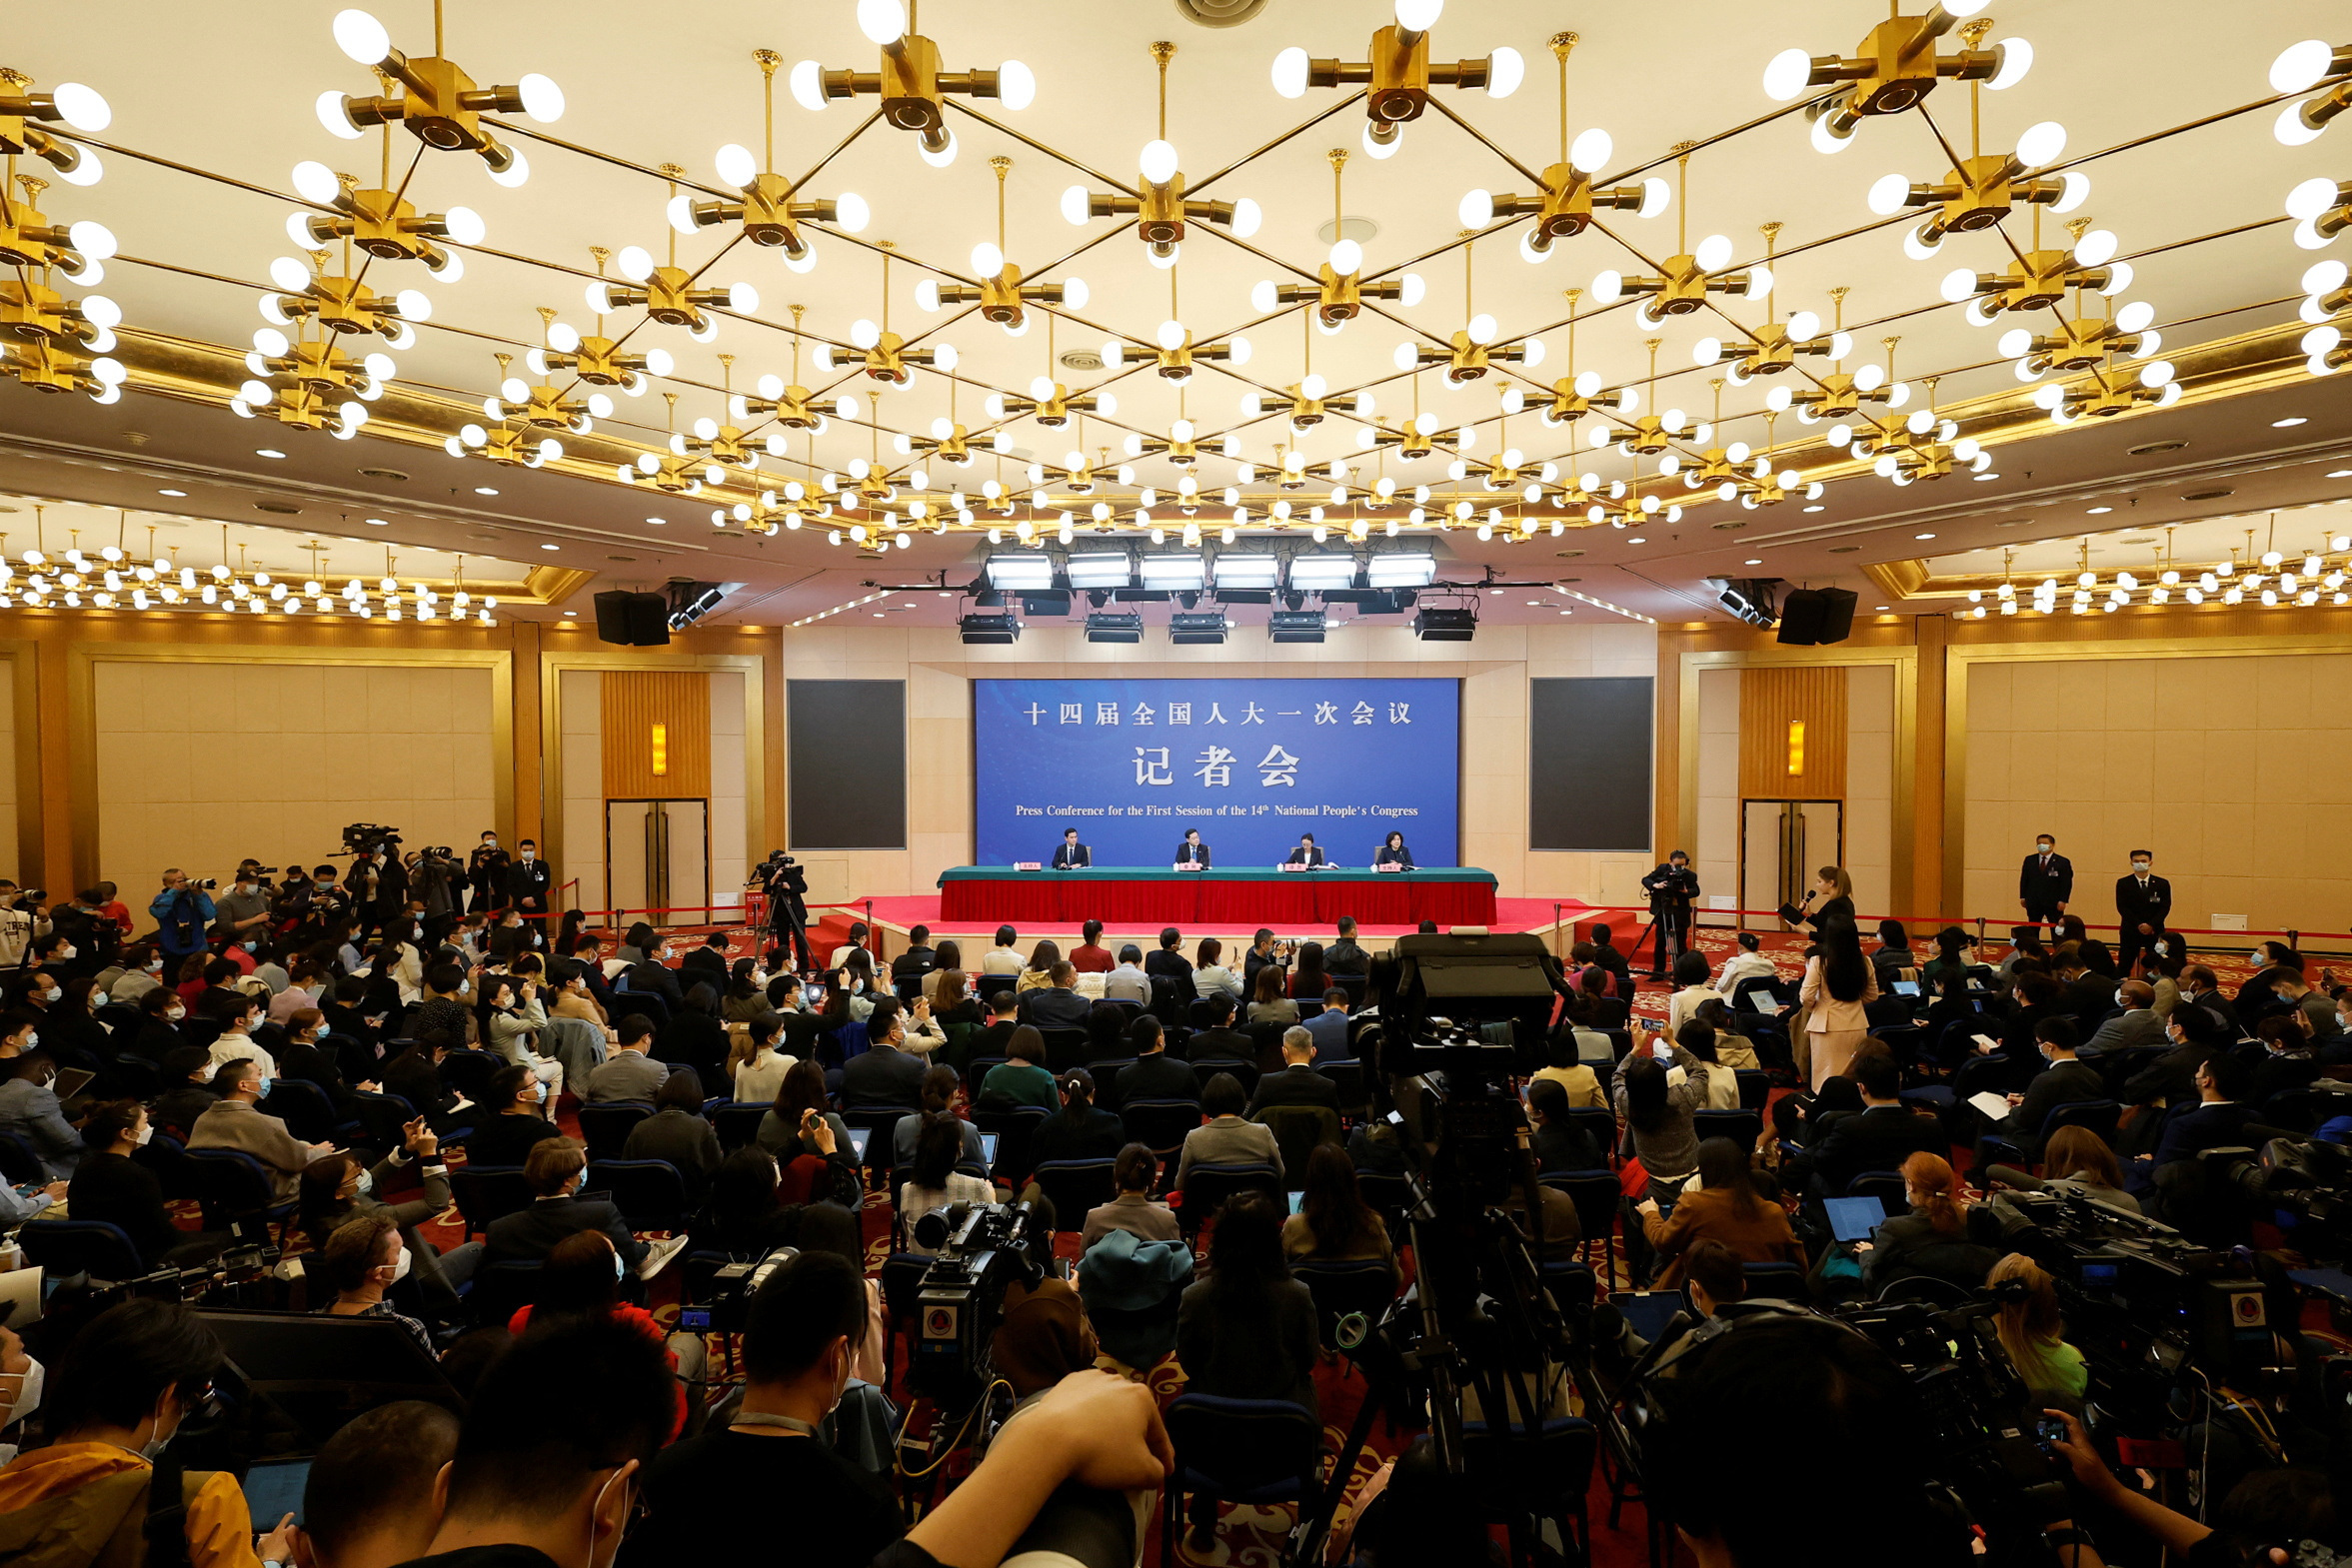 Chinese Foreign Minister Qin Gang at a news conference in Beijing